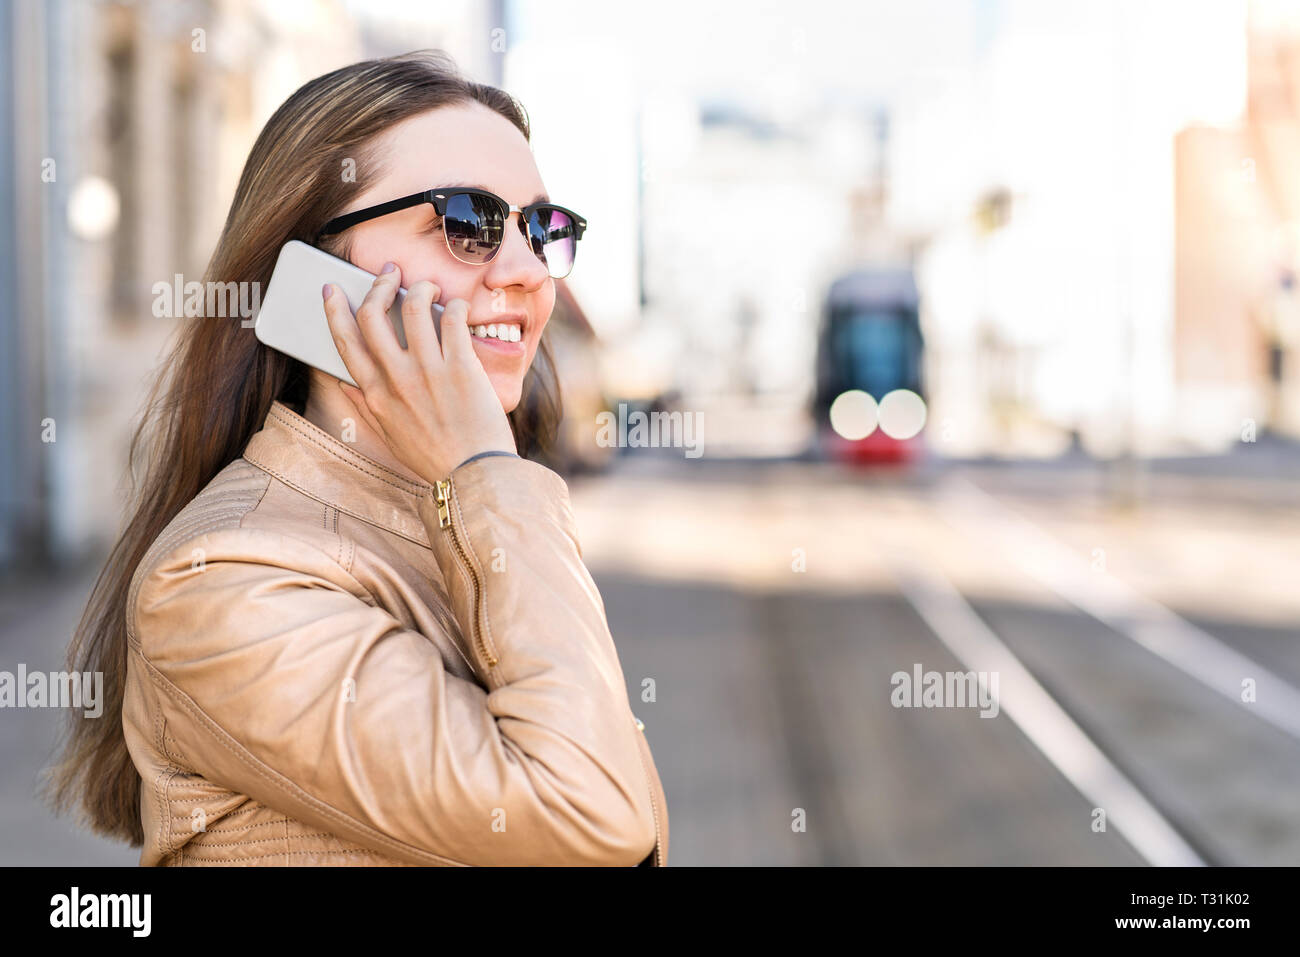 Young woman waiting for city train and talking on the phone. Passenger at tram stop calling with smartphone. Public transport and communication. Stock Photo